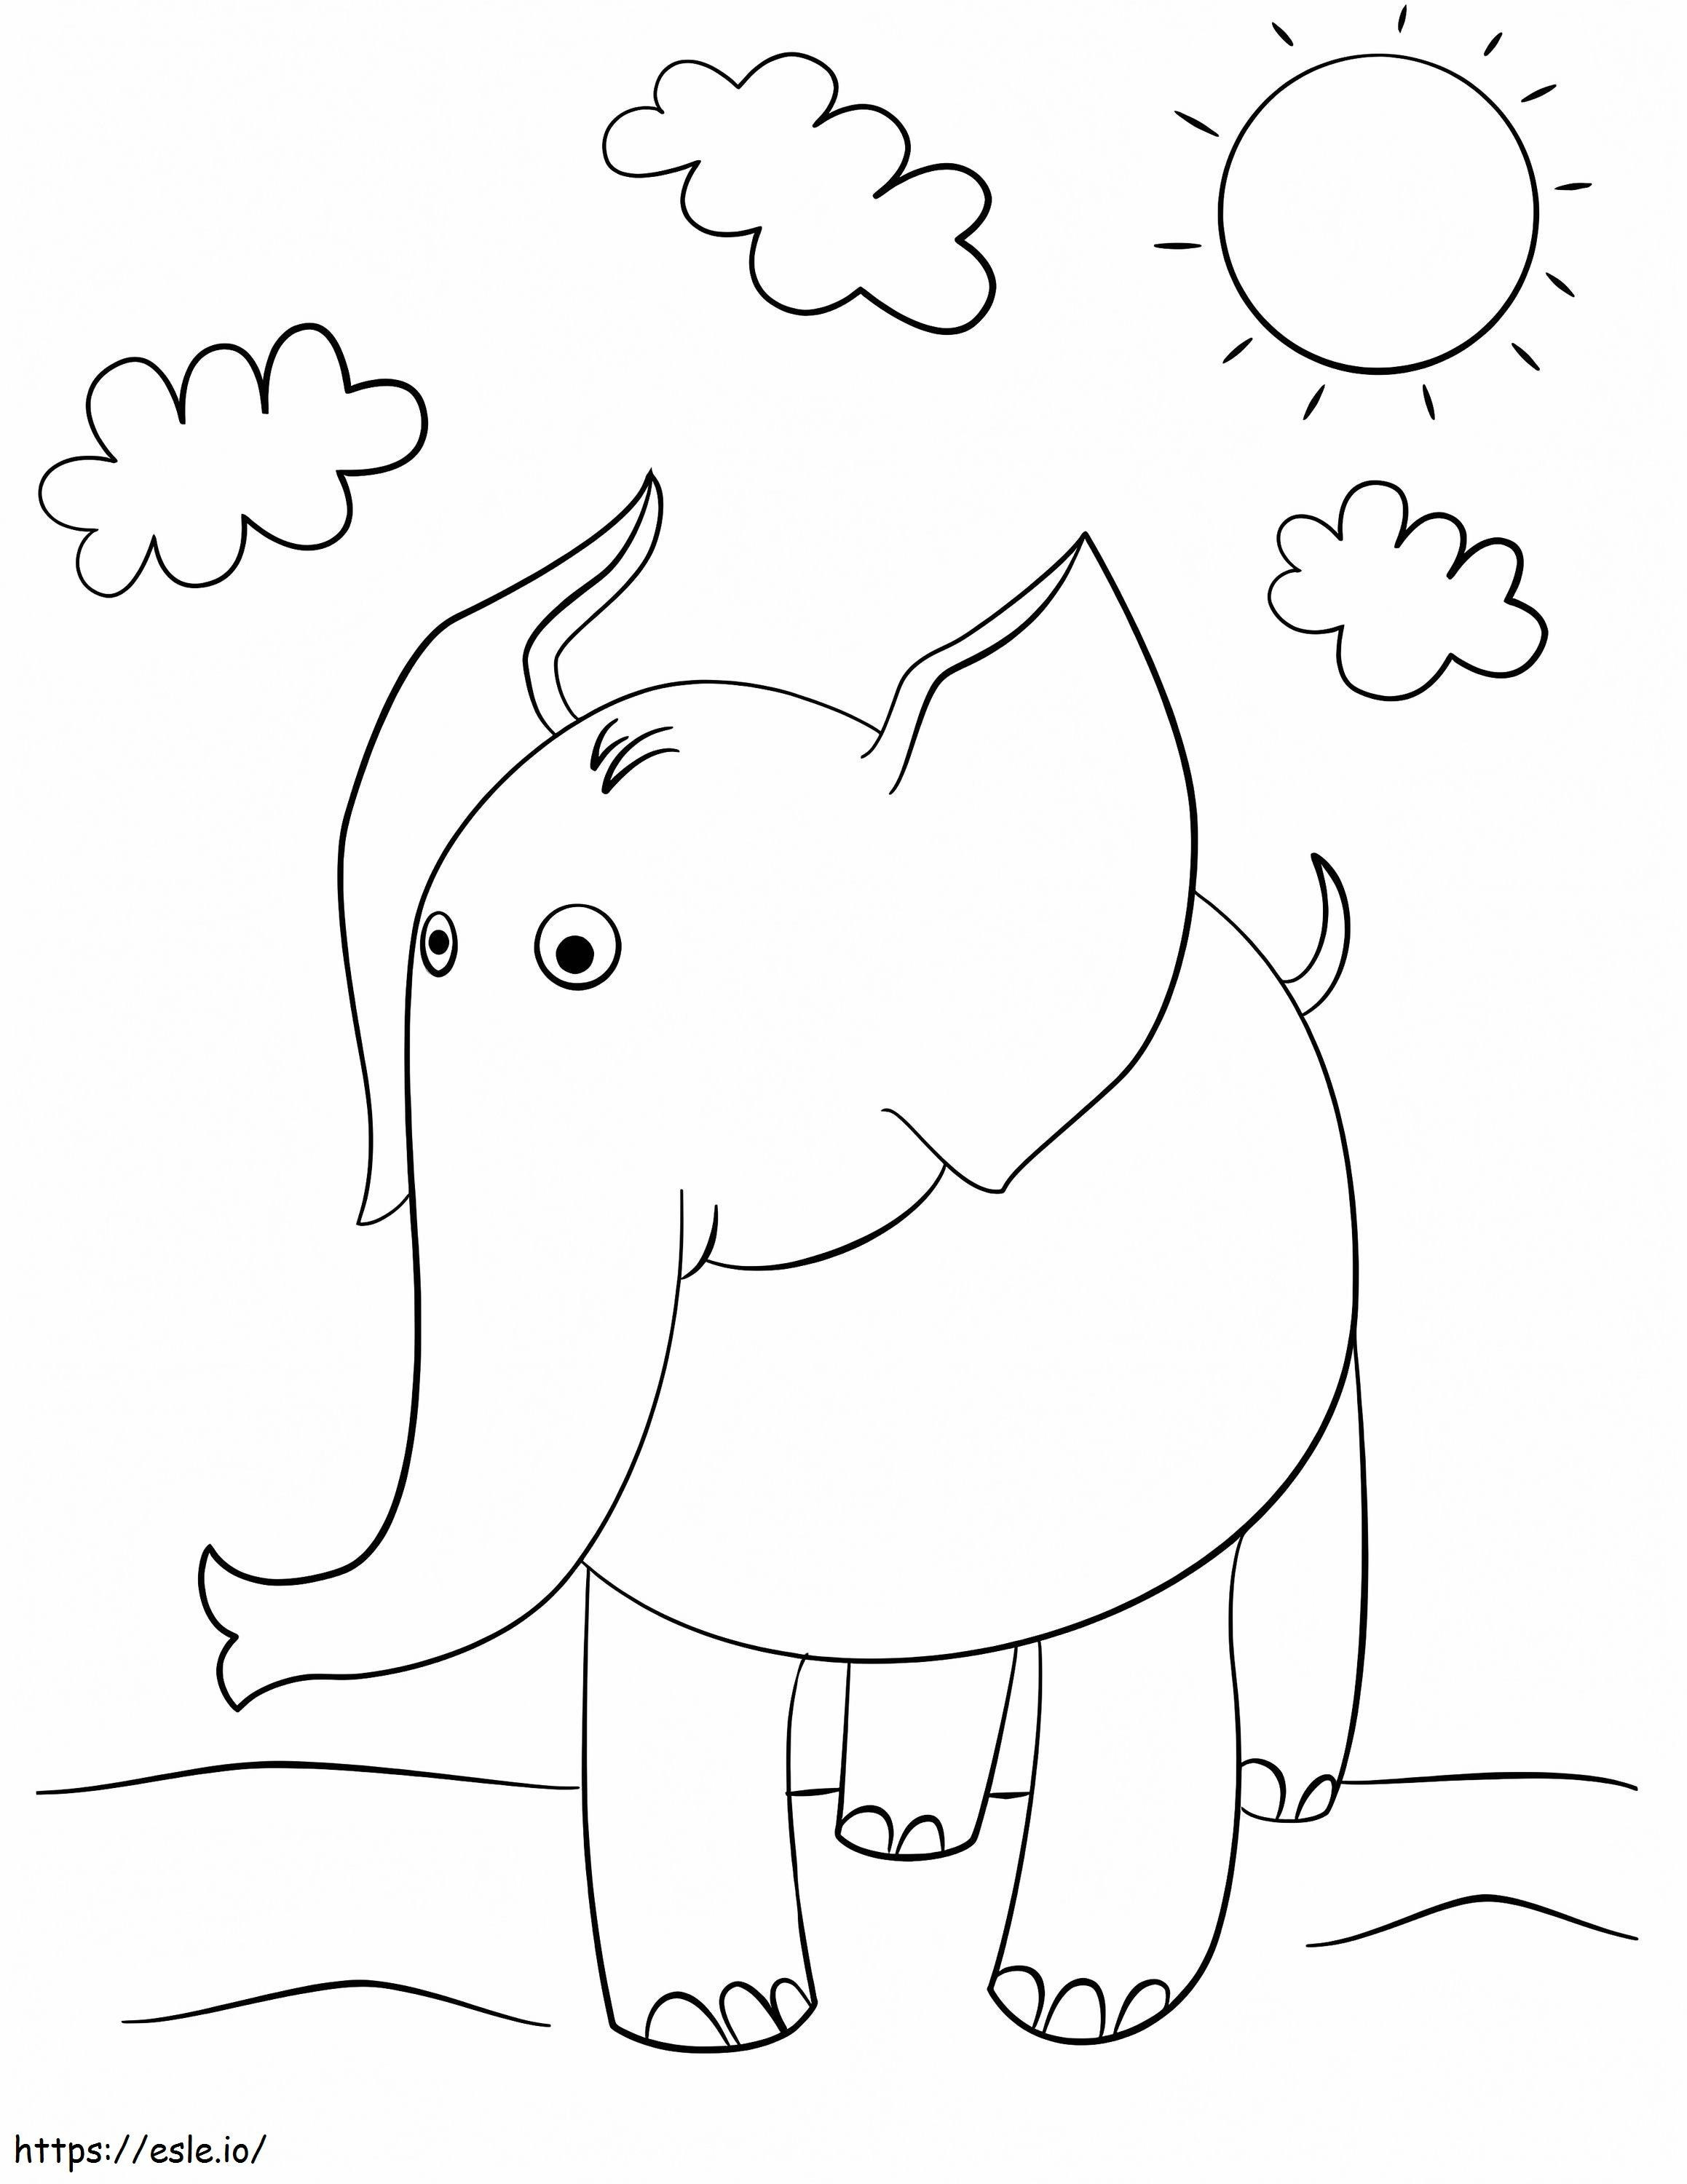 Elephant 2 coloring page